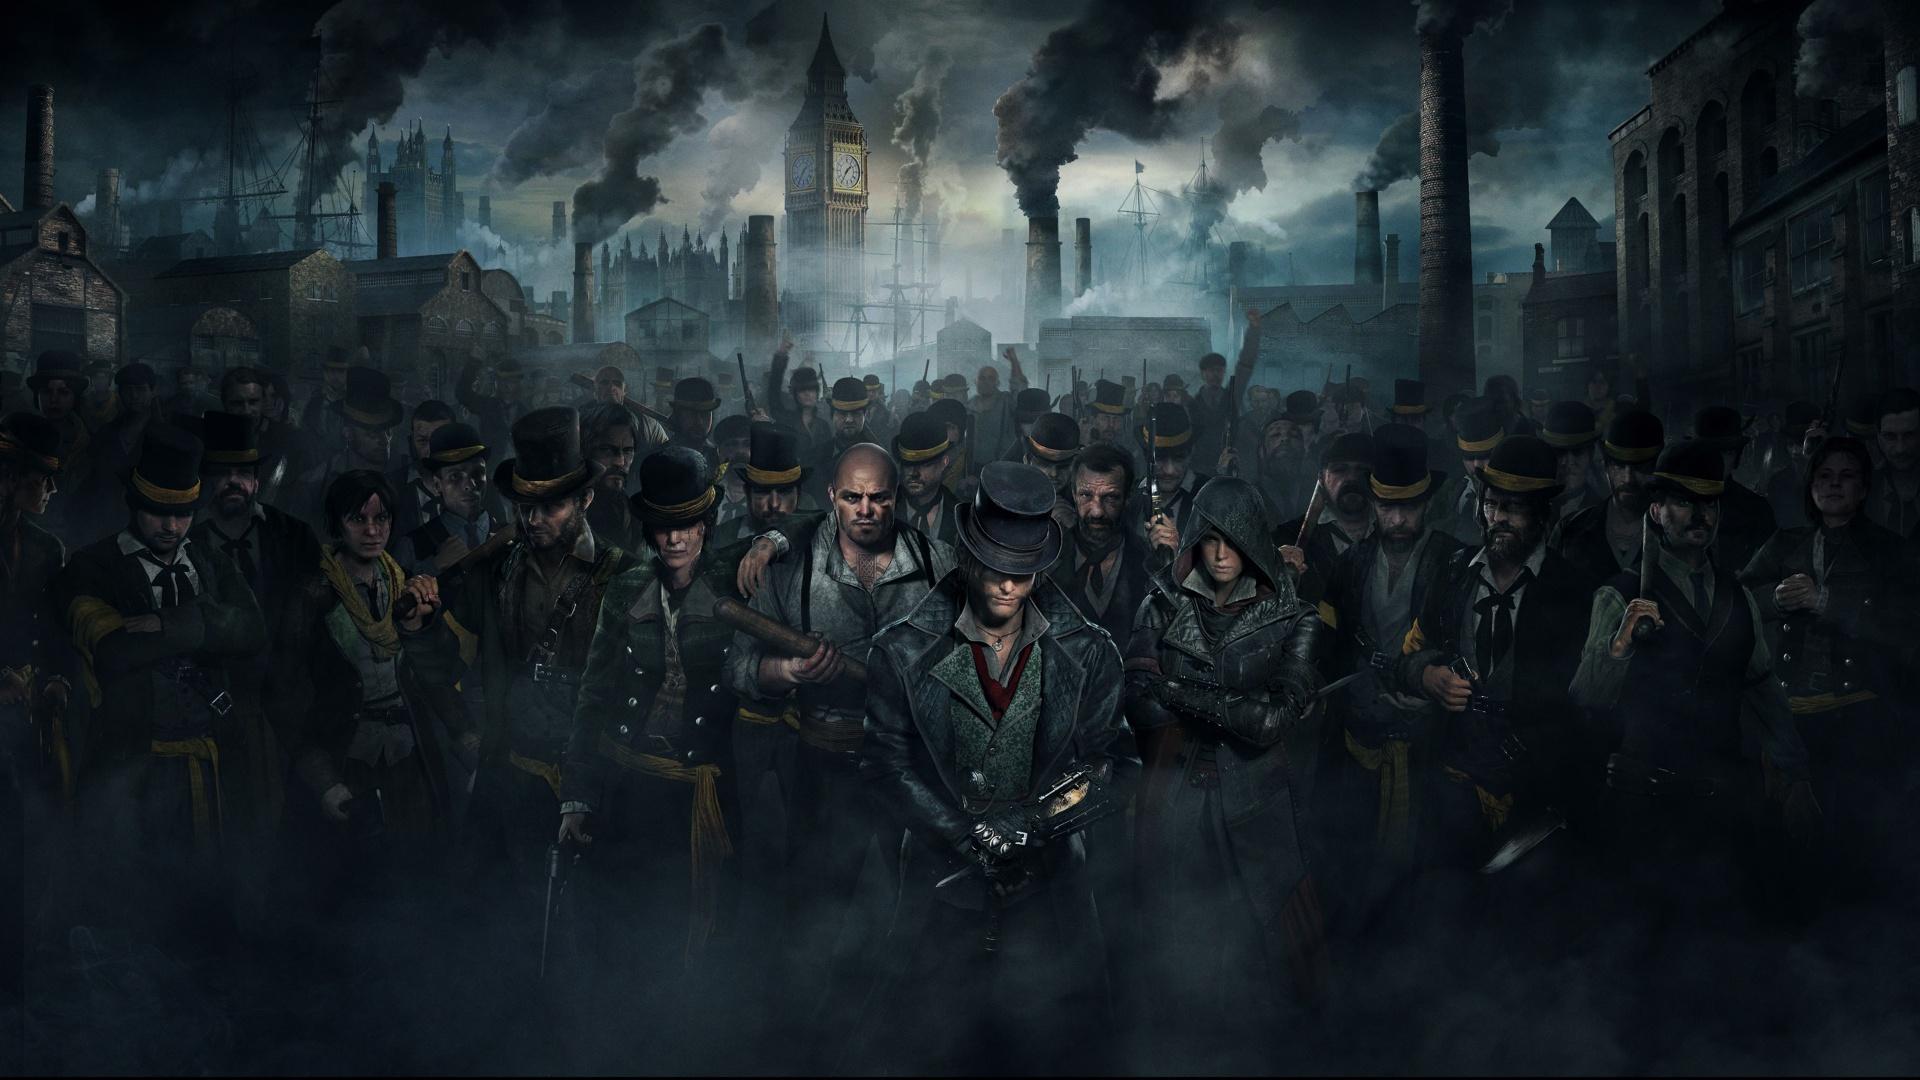 Full HD Wallpaper assassins creed syndicate crowd london industrial